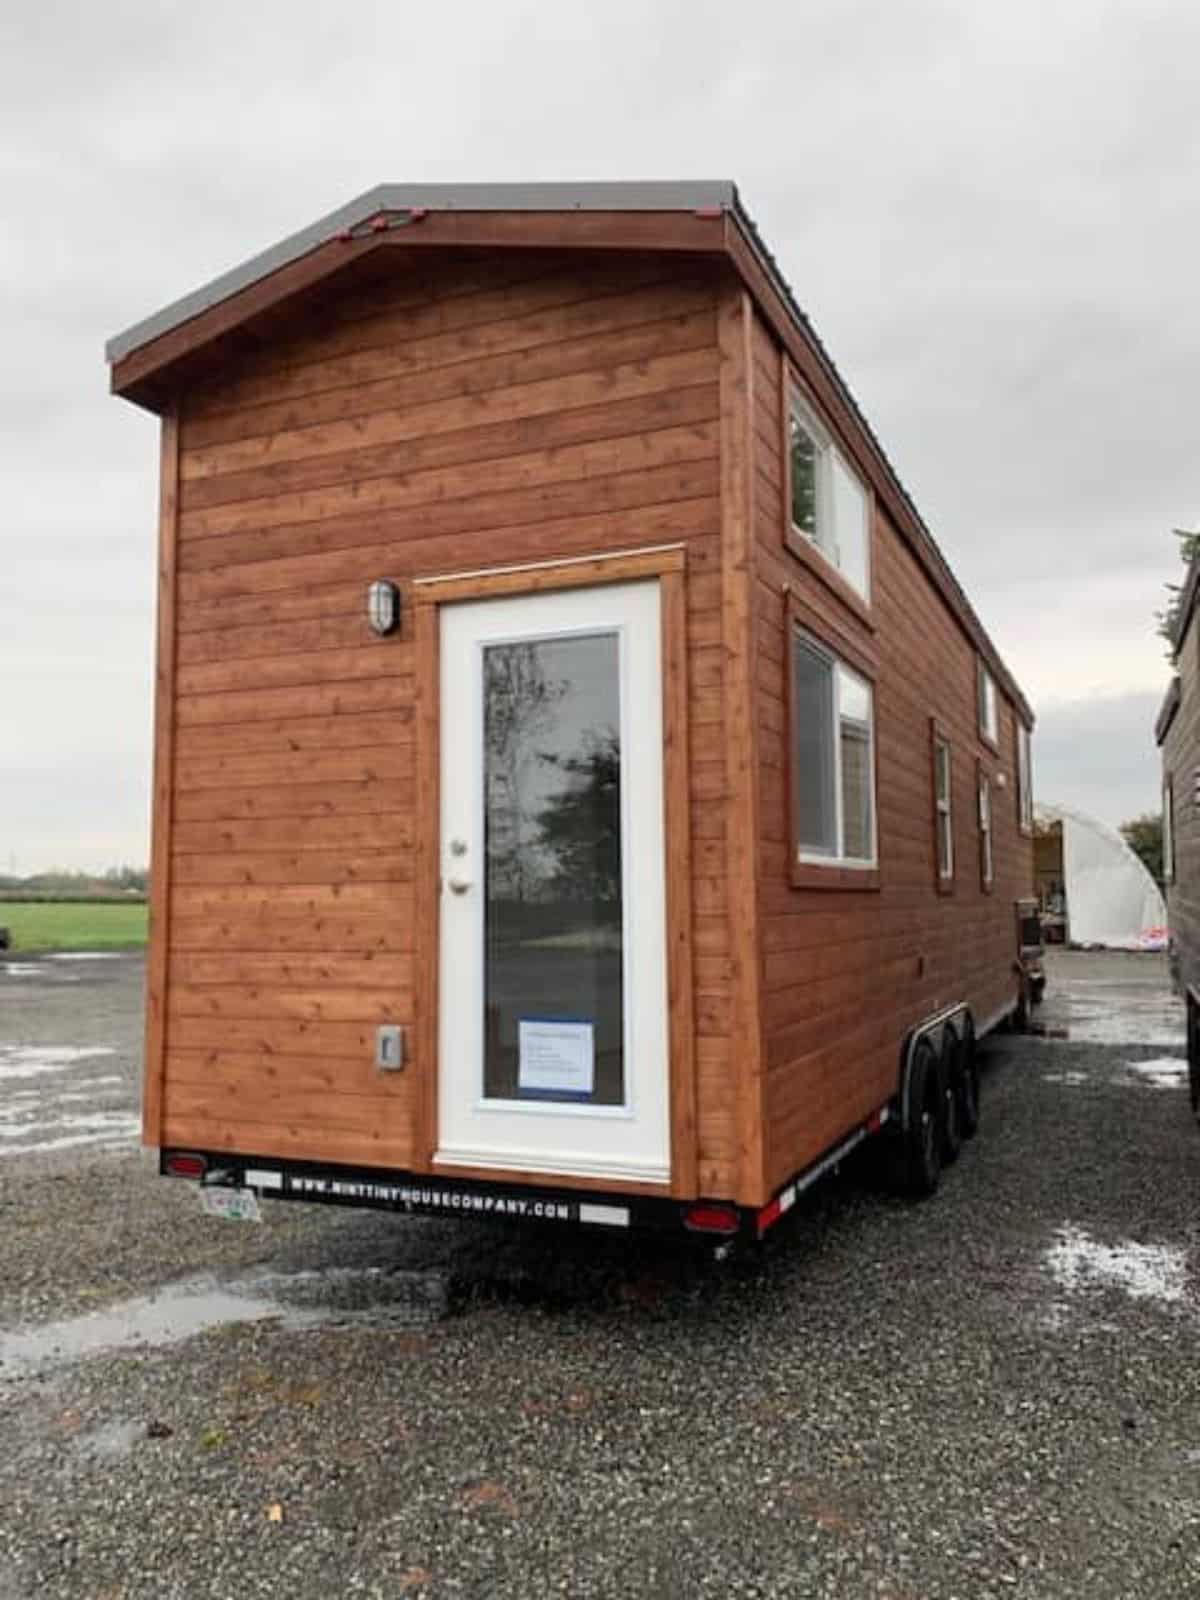 Stunning wooden exterior of professionally built tiny home